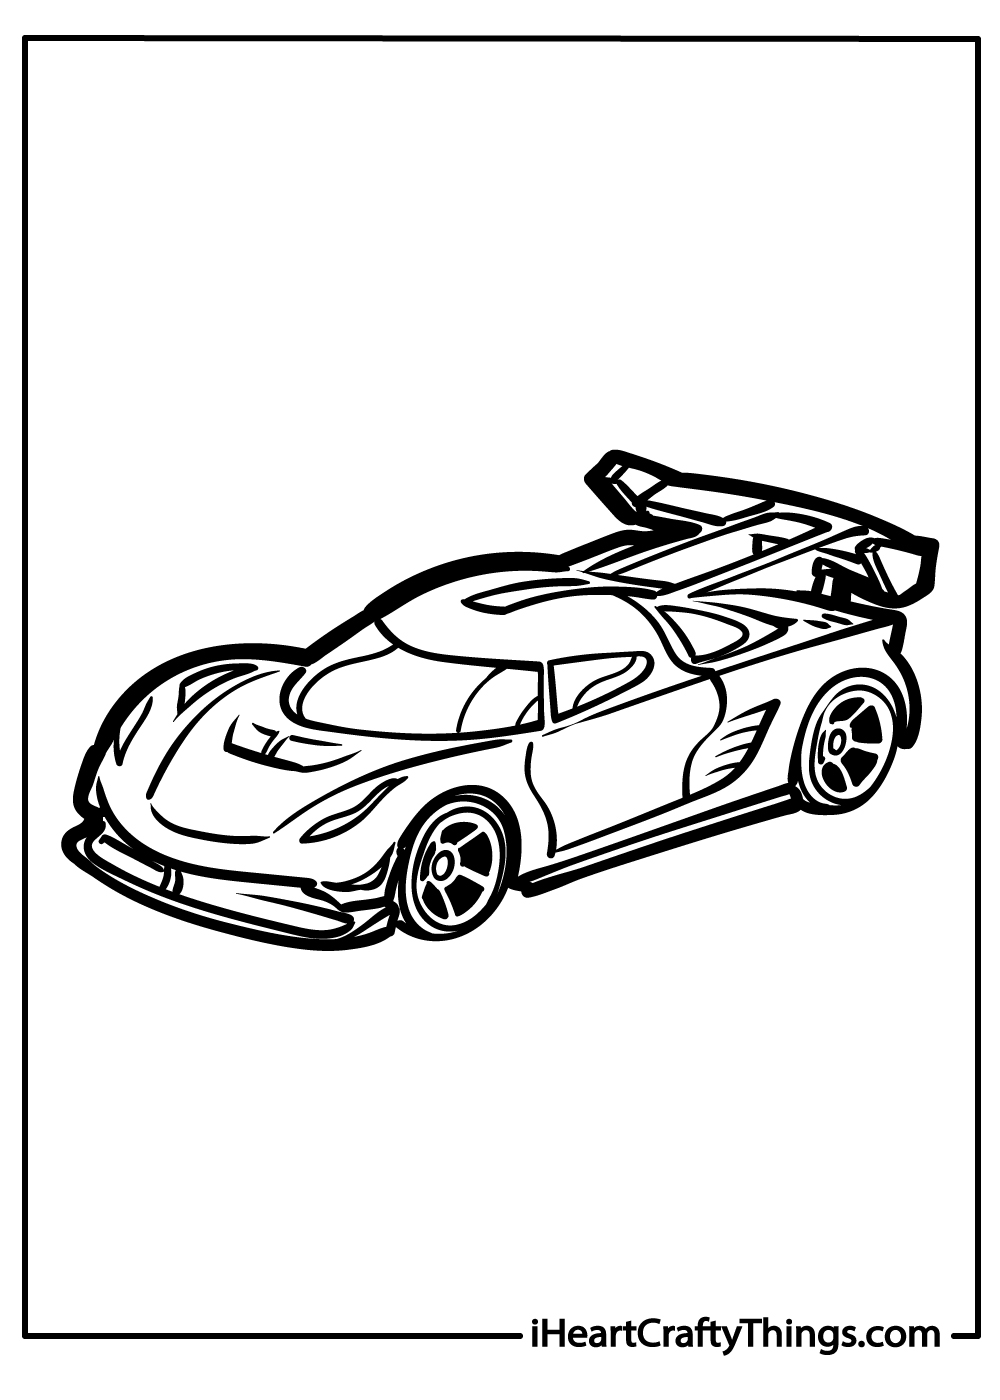 Hot Wheels Coloring Pages for kids